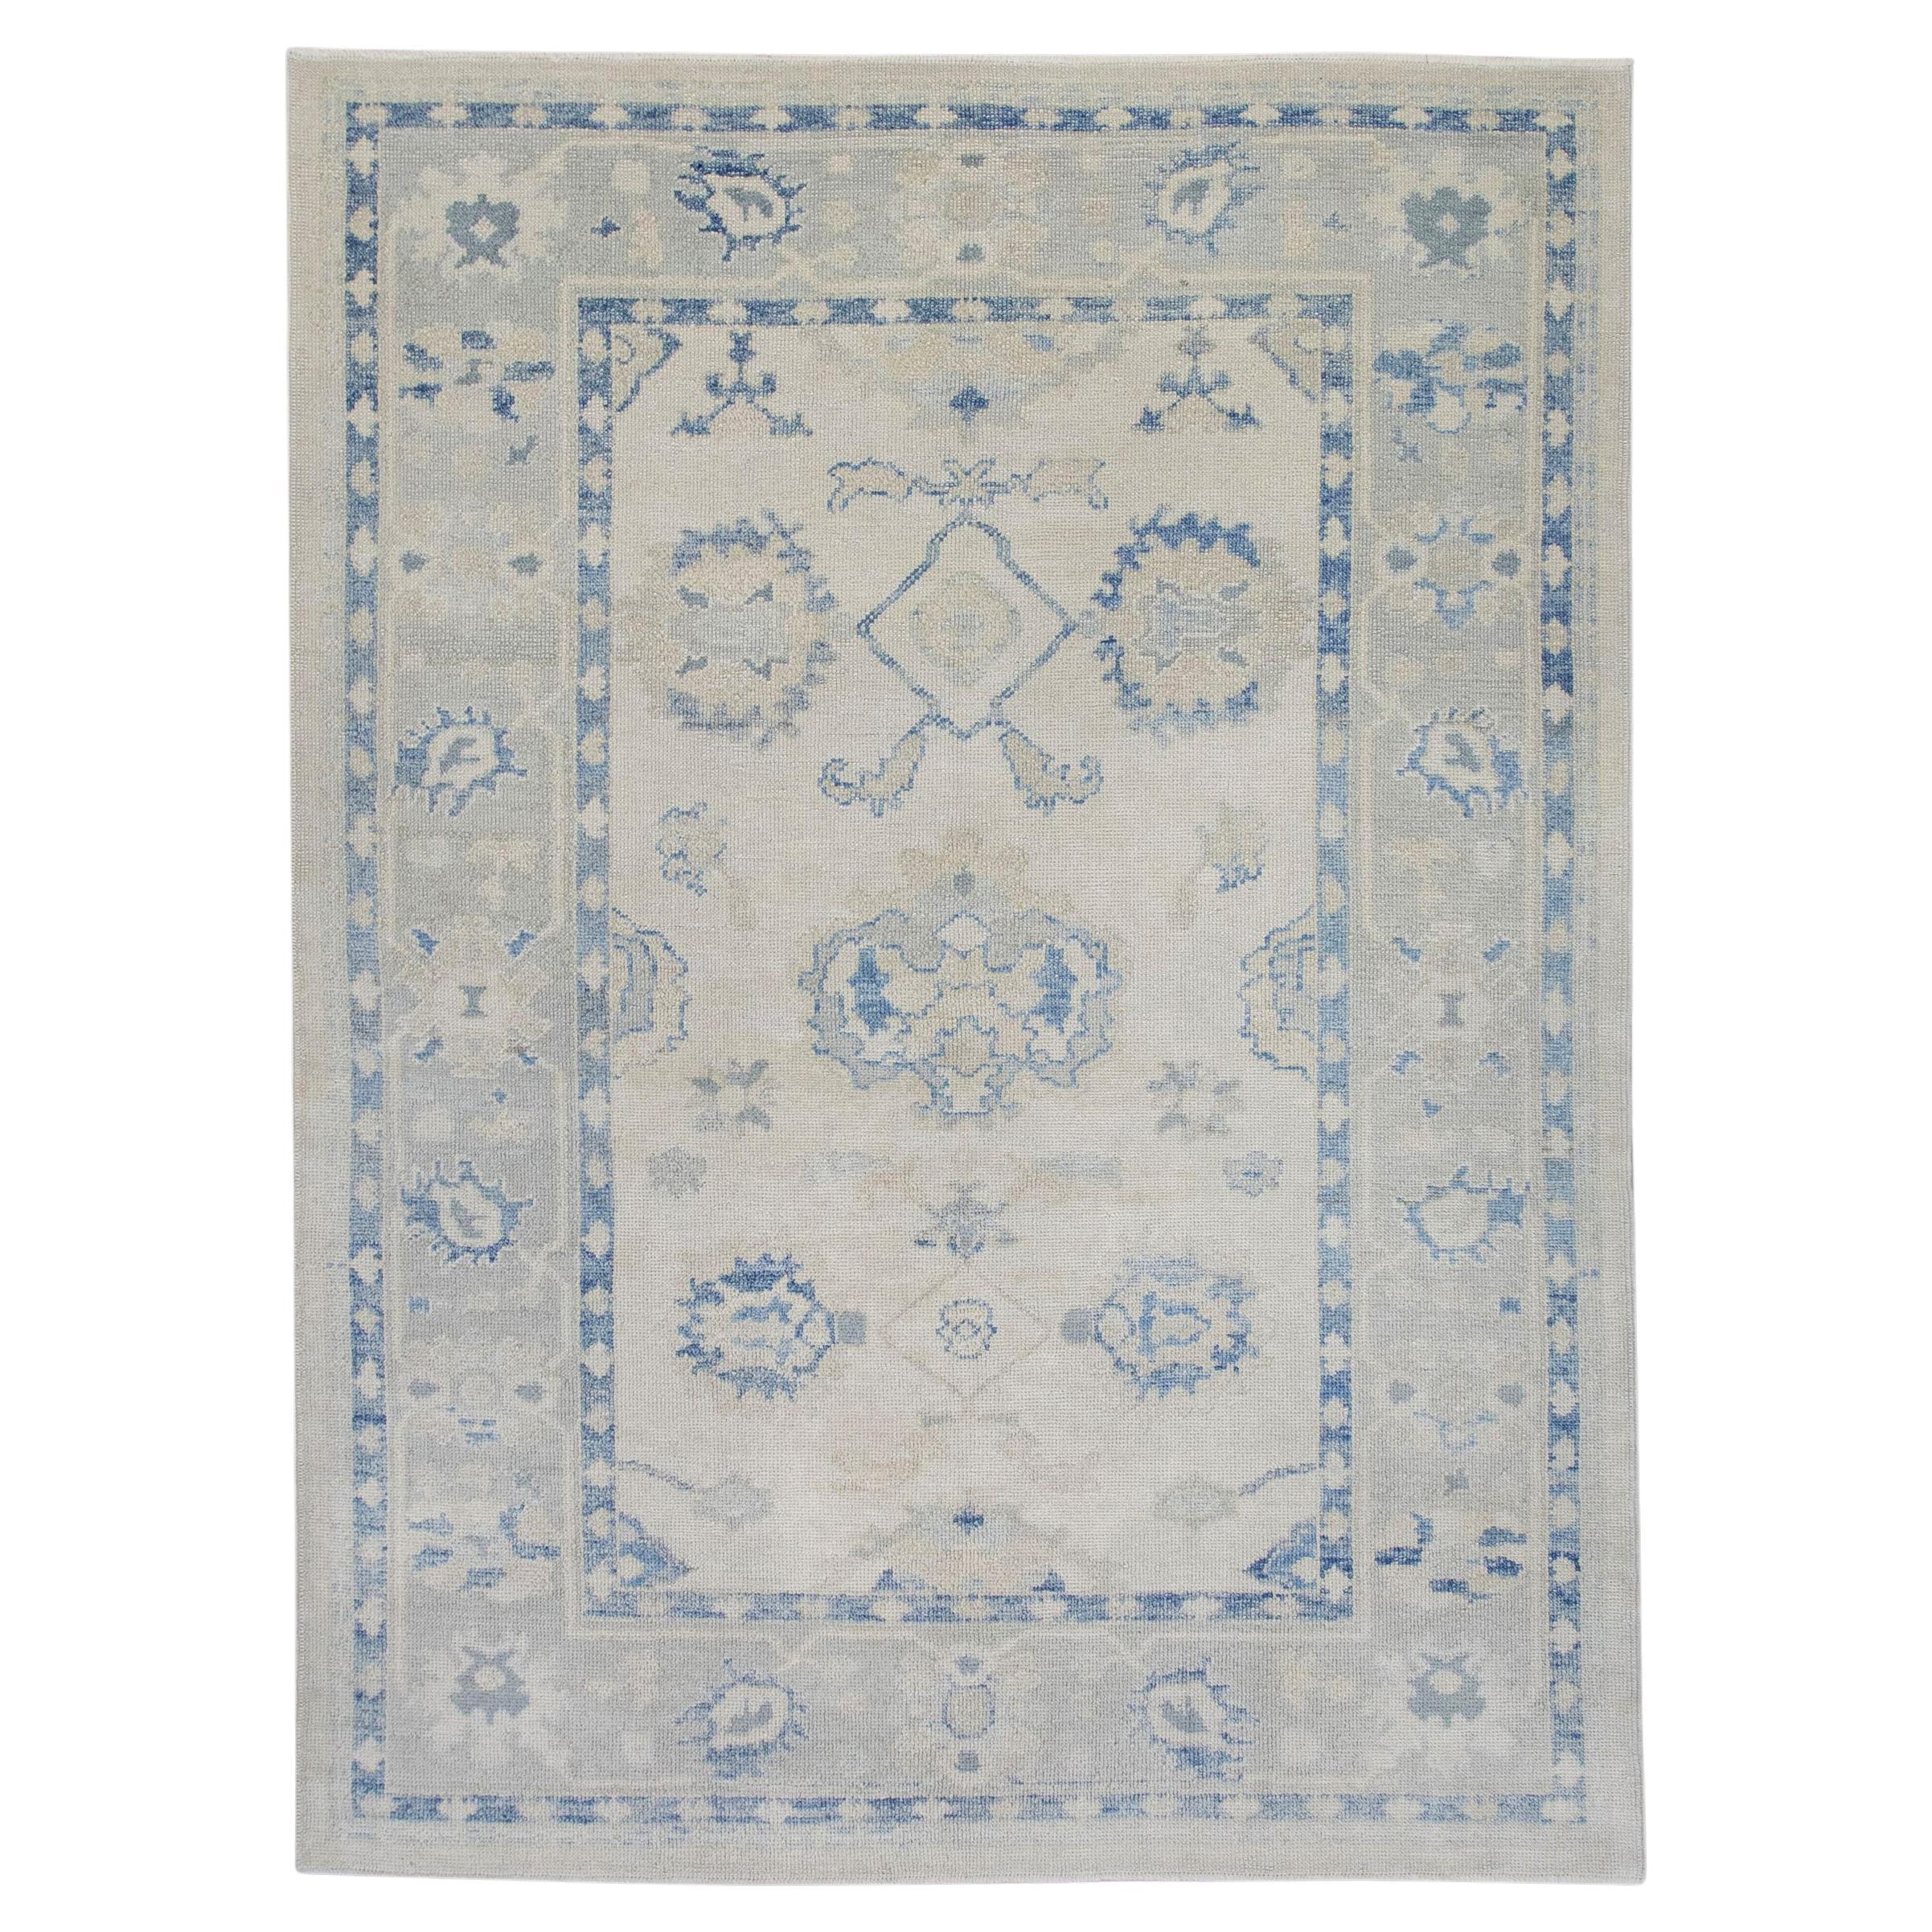 Floral Handwoven Wool Turkish Oushak Rug in Cream and Blue 6'2" x 8'8"